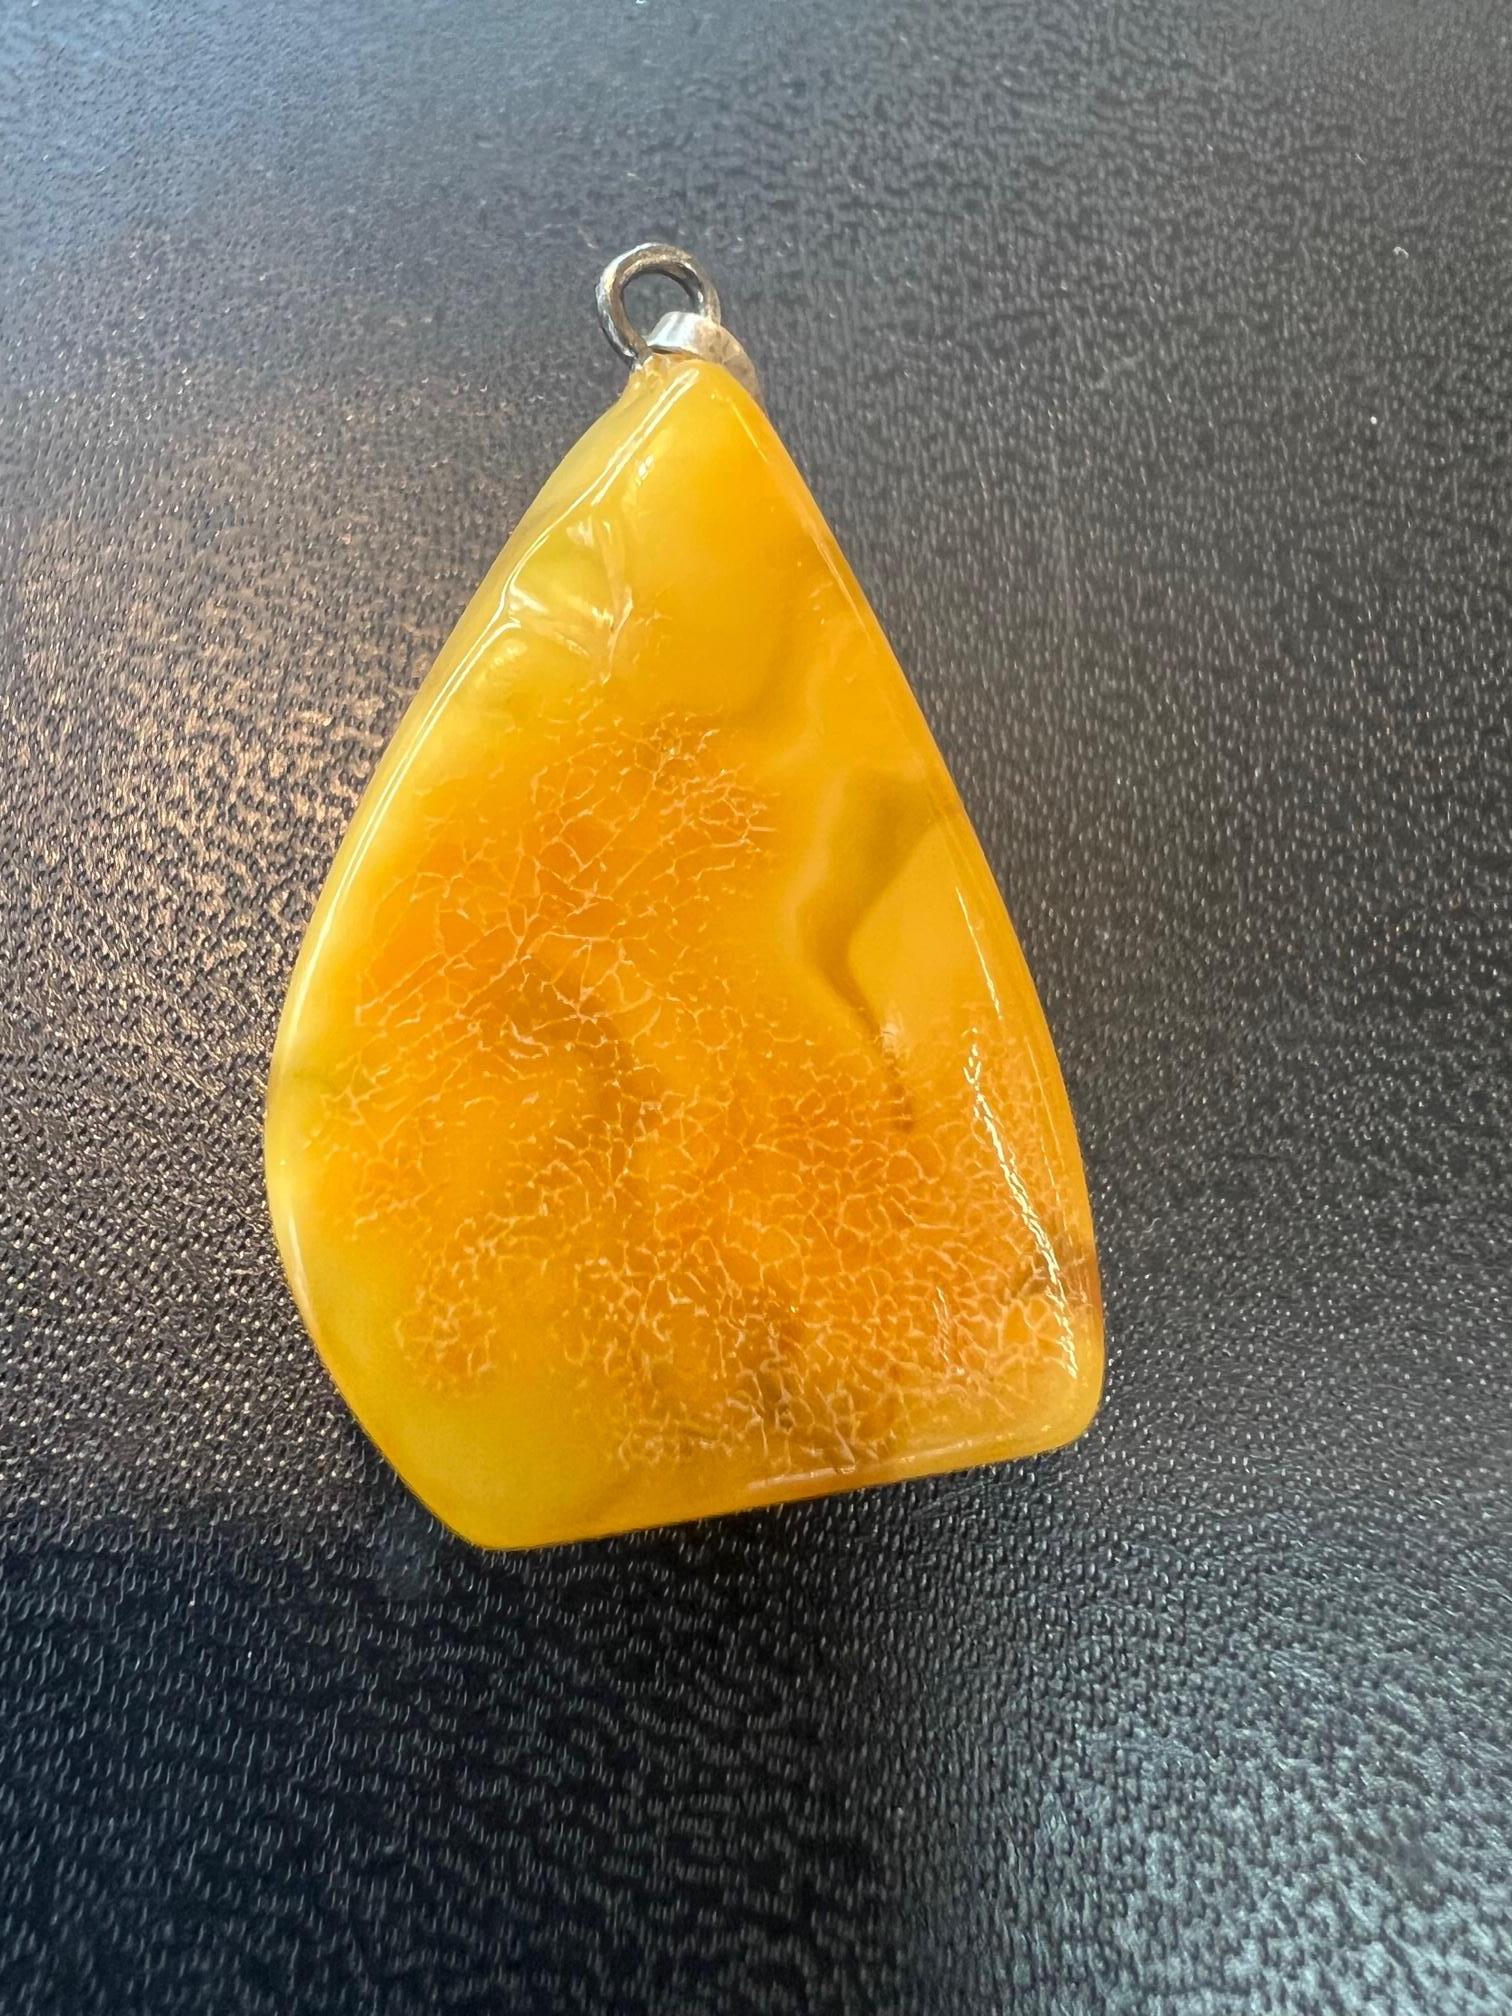 Authentic Baltic Amber Pendant

Baltic amber, also known as 